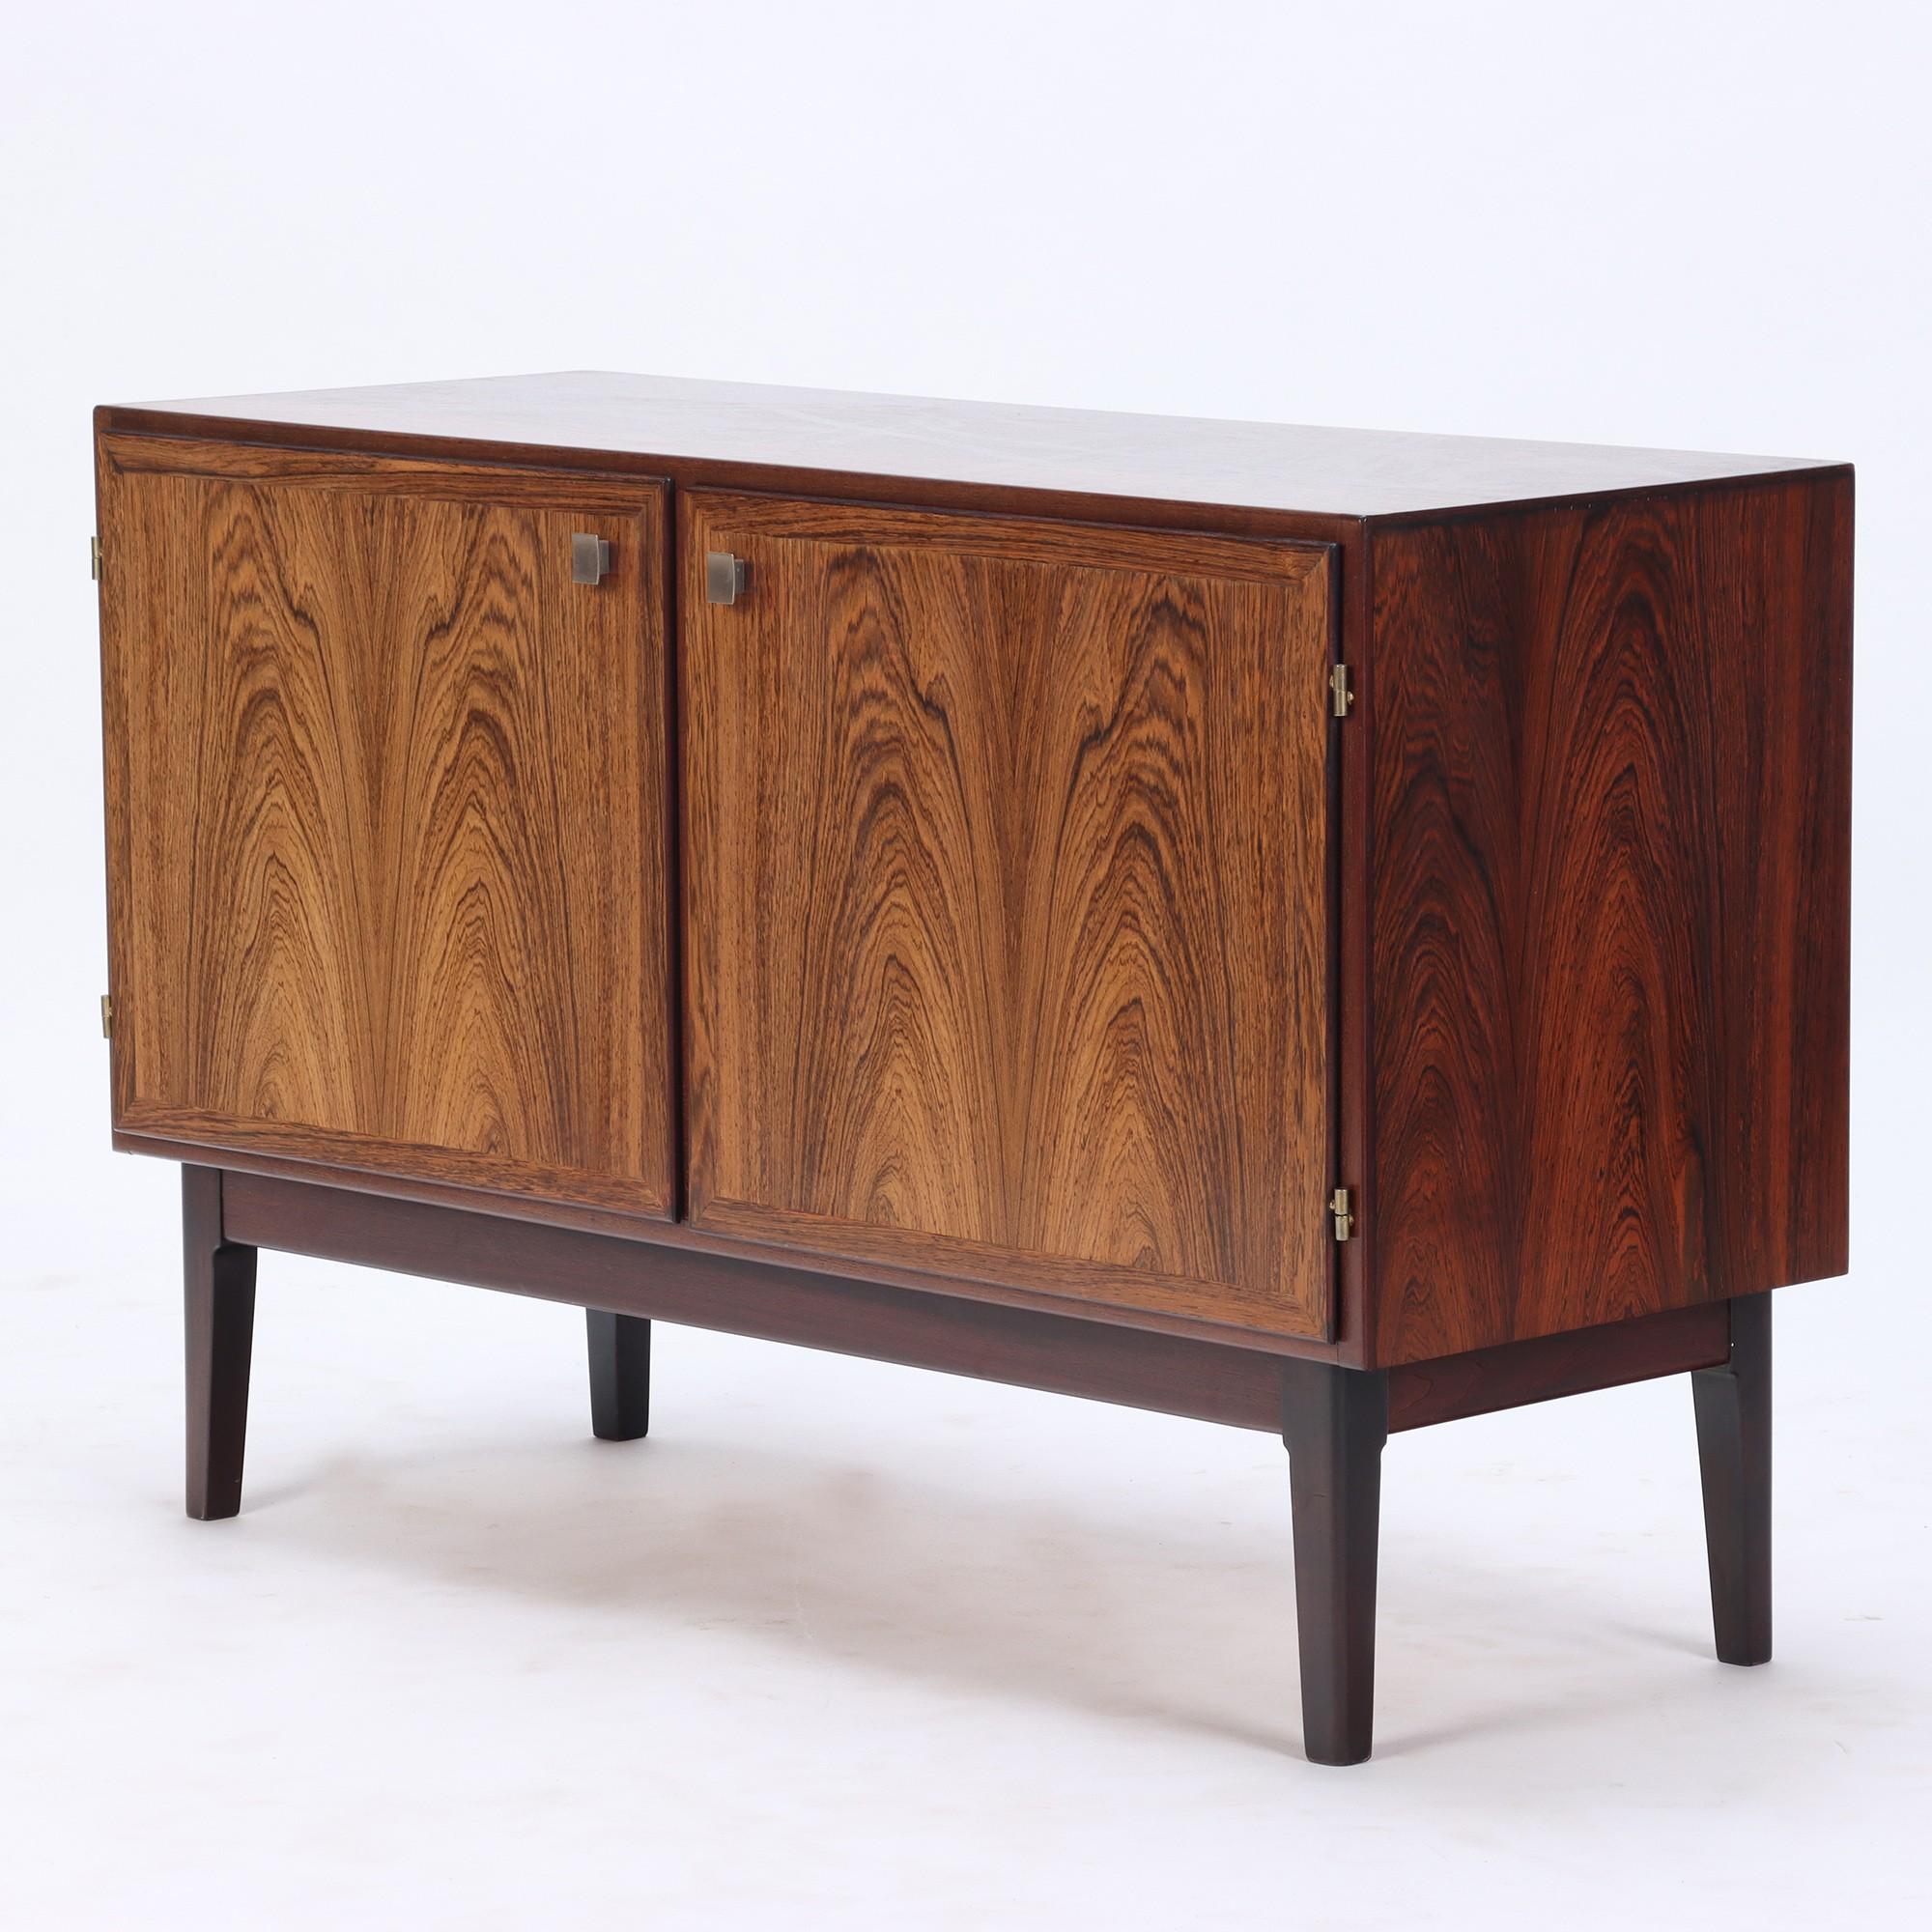 A Danish Mid Century Modern two door rosewood cabinet circa 1960. Featuring brushed metal door handles, two interior shelves, and bookmatched fronts. Perfect for use as a media cabinet, credenza, or small buffet server.